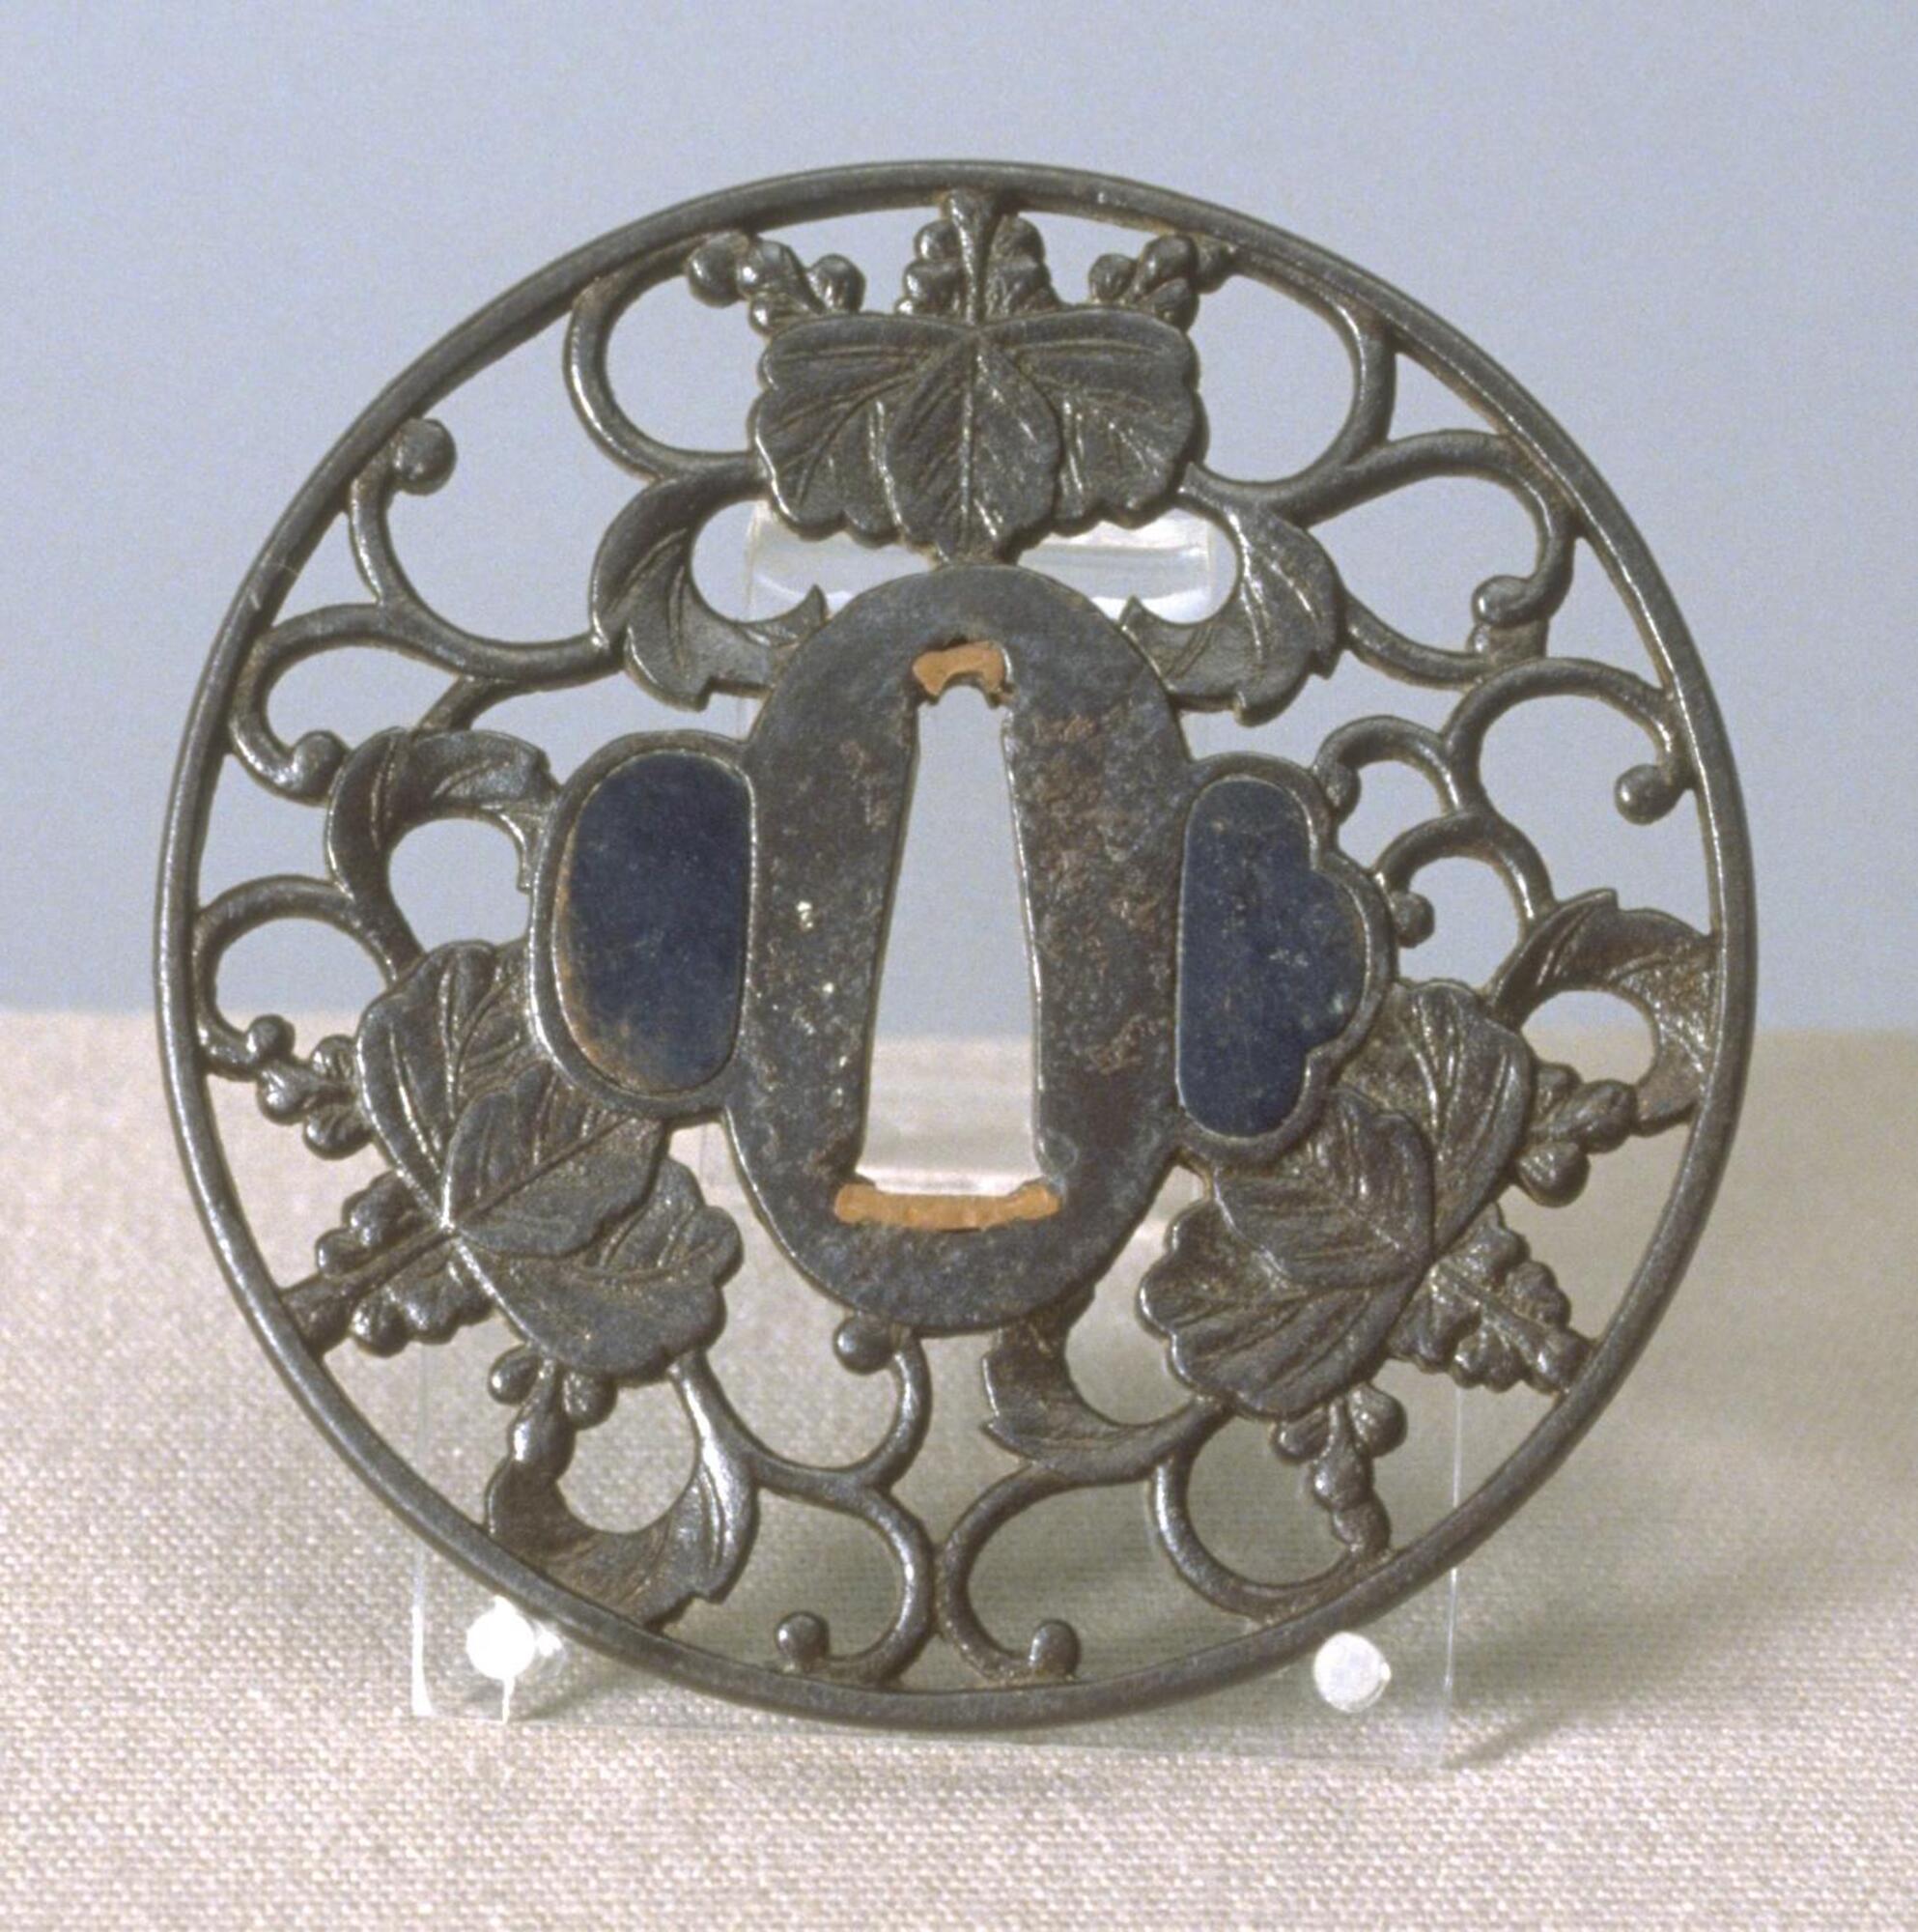 This small, flat metal piece has a circular shape and an openwork design. It has a triangular shaped sword hole in the center, flanked by two other holes, which are filled with shakudô (copper-gold alloy). The sword hole is mended with gold. Three crests, consisting of pawlownia leaves and flowers, are interconnected with vines. There are some abrasions on the center oval shape around the sword hole. The surface is slightly textured by minute stippling. The outer rim is slightly elevated from the inner design. This openwork carving technique is called "marubori" (round carving).